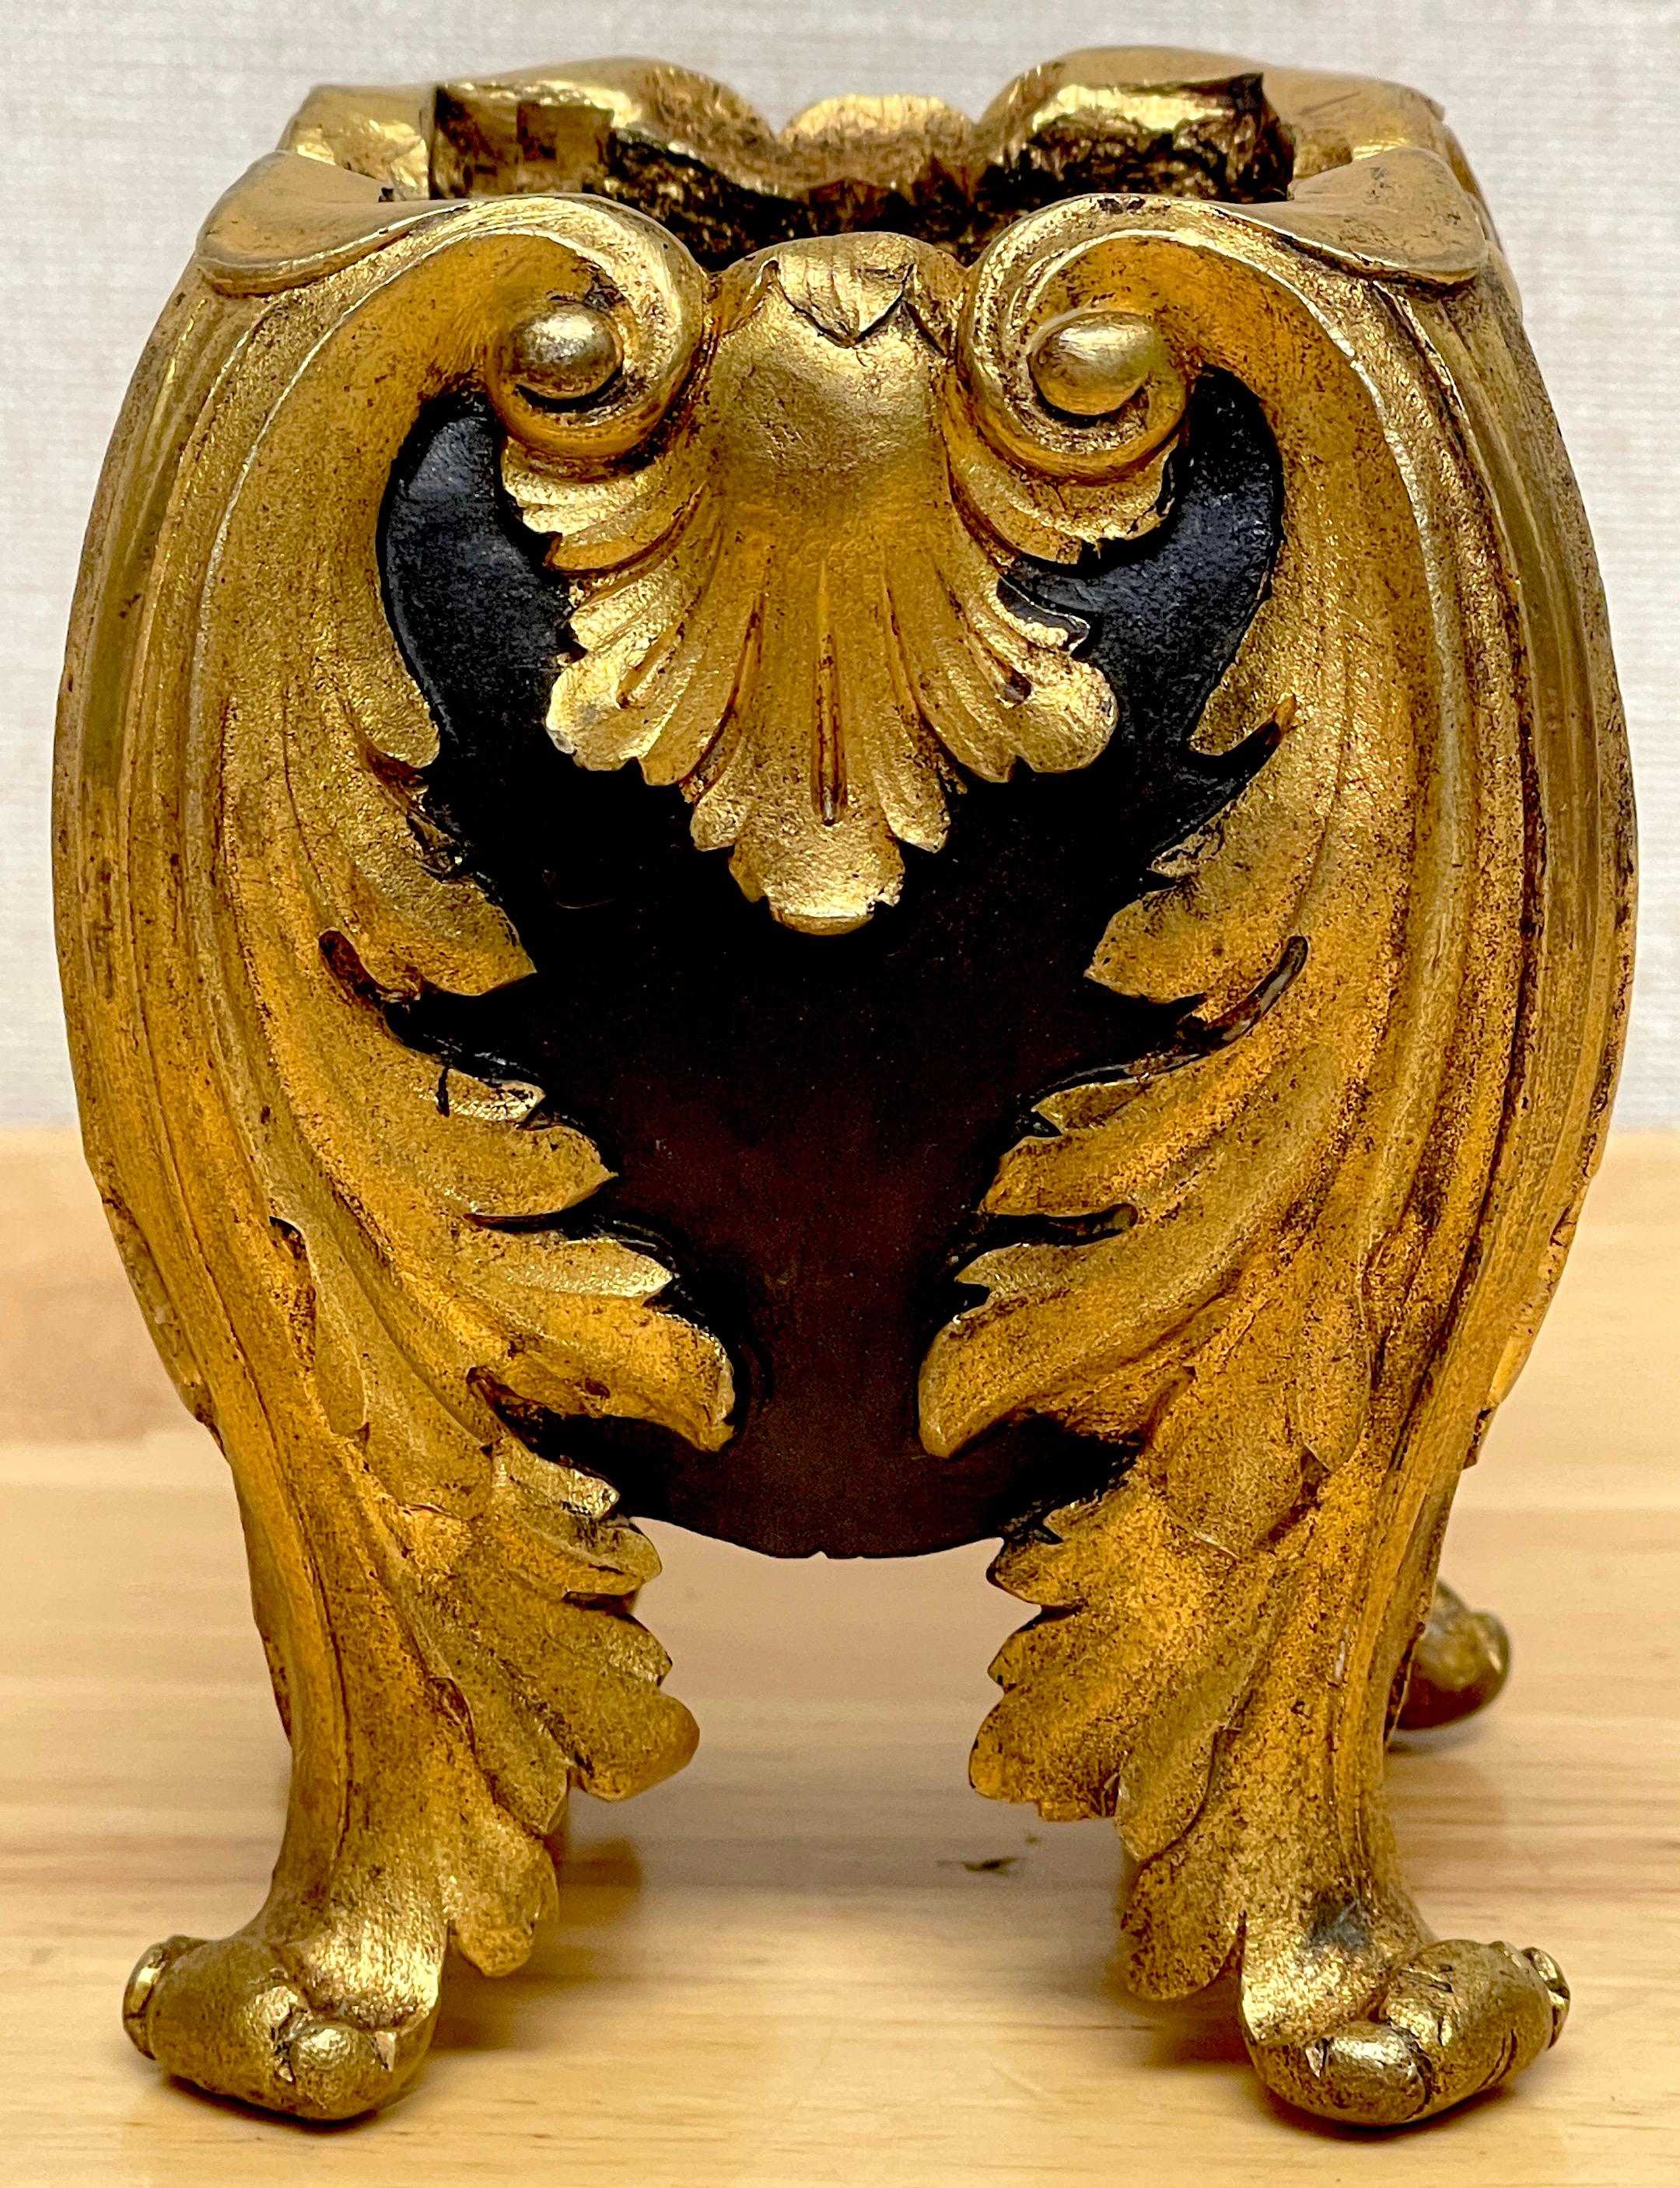 Diminutive Louis XV ormolu & patinated bronze cachepot*
France, of period Louis XV (1715-1744) or older

A subtle, magnificent casting, of cachepot form, with ormolu shell and acanthus motif, with patinated cartouche, supported by four ormolu